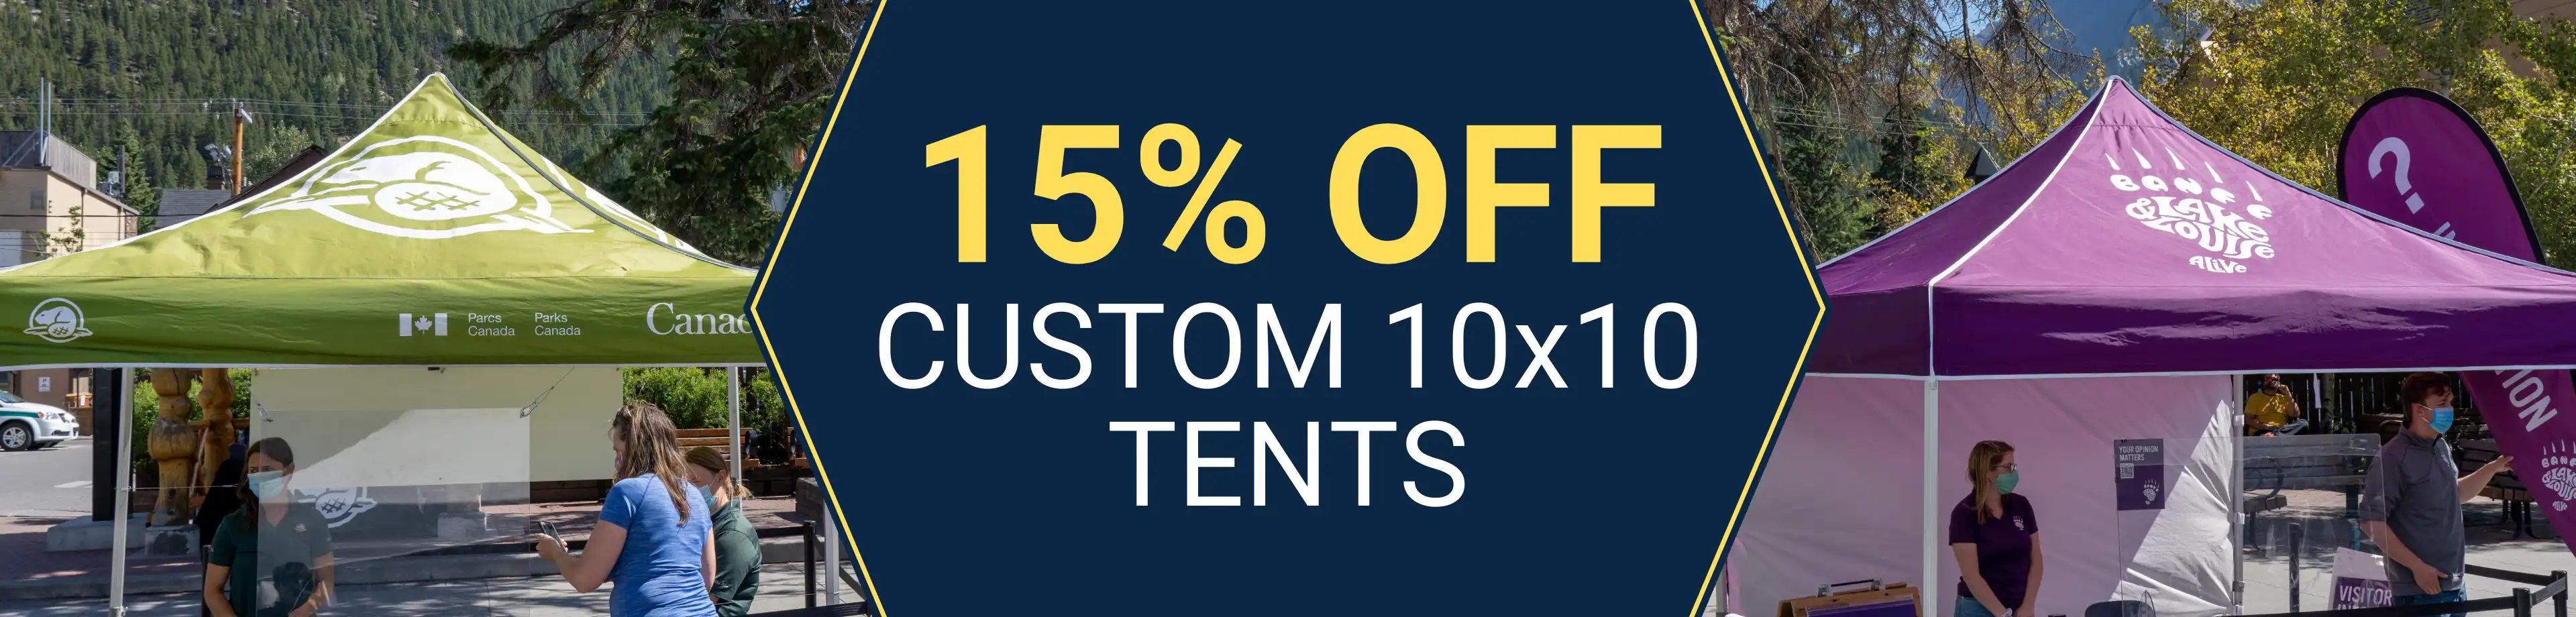 Custom Pop Up Tents on Sale for a Limited Time Only - Get Trade Show Ready with Fully Customizable Event Tents for Great Brand Visibility!